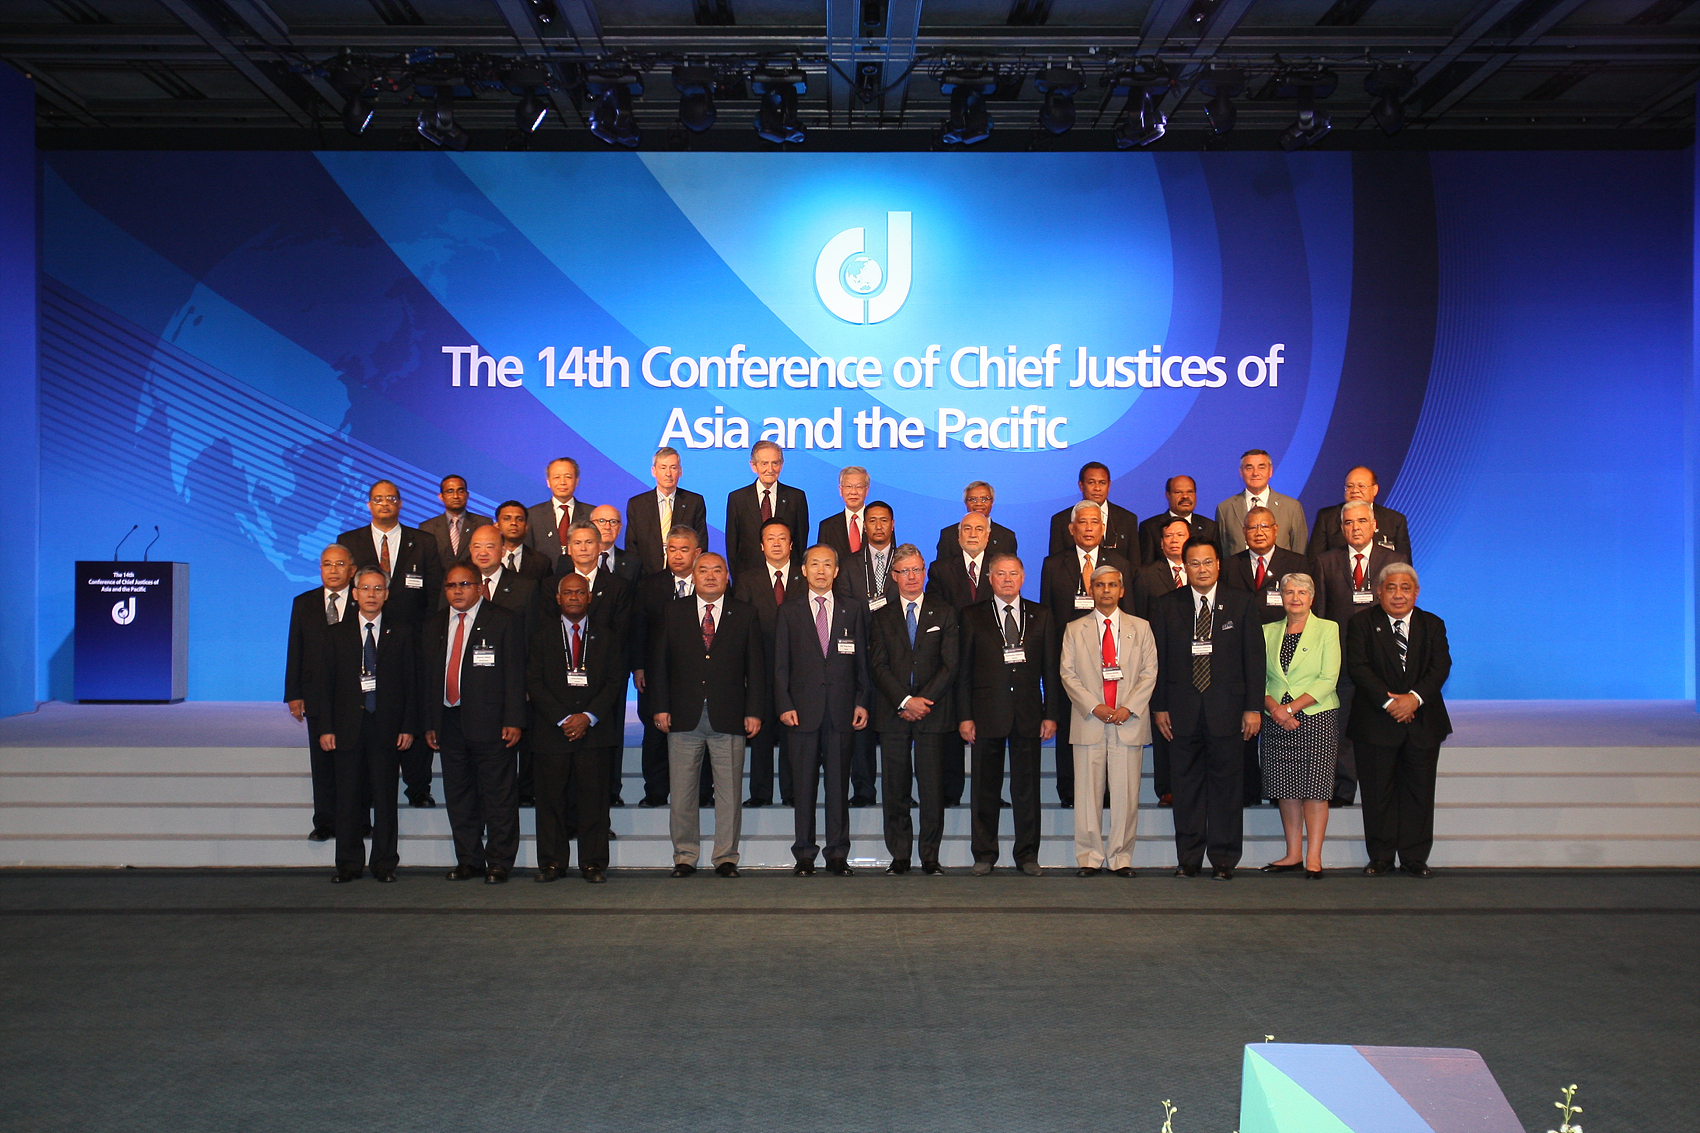 [06_12_11]The 14th Conference of Chief Justices of Asia and the Pacific hosted by the Supreme Court of Korea